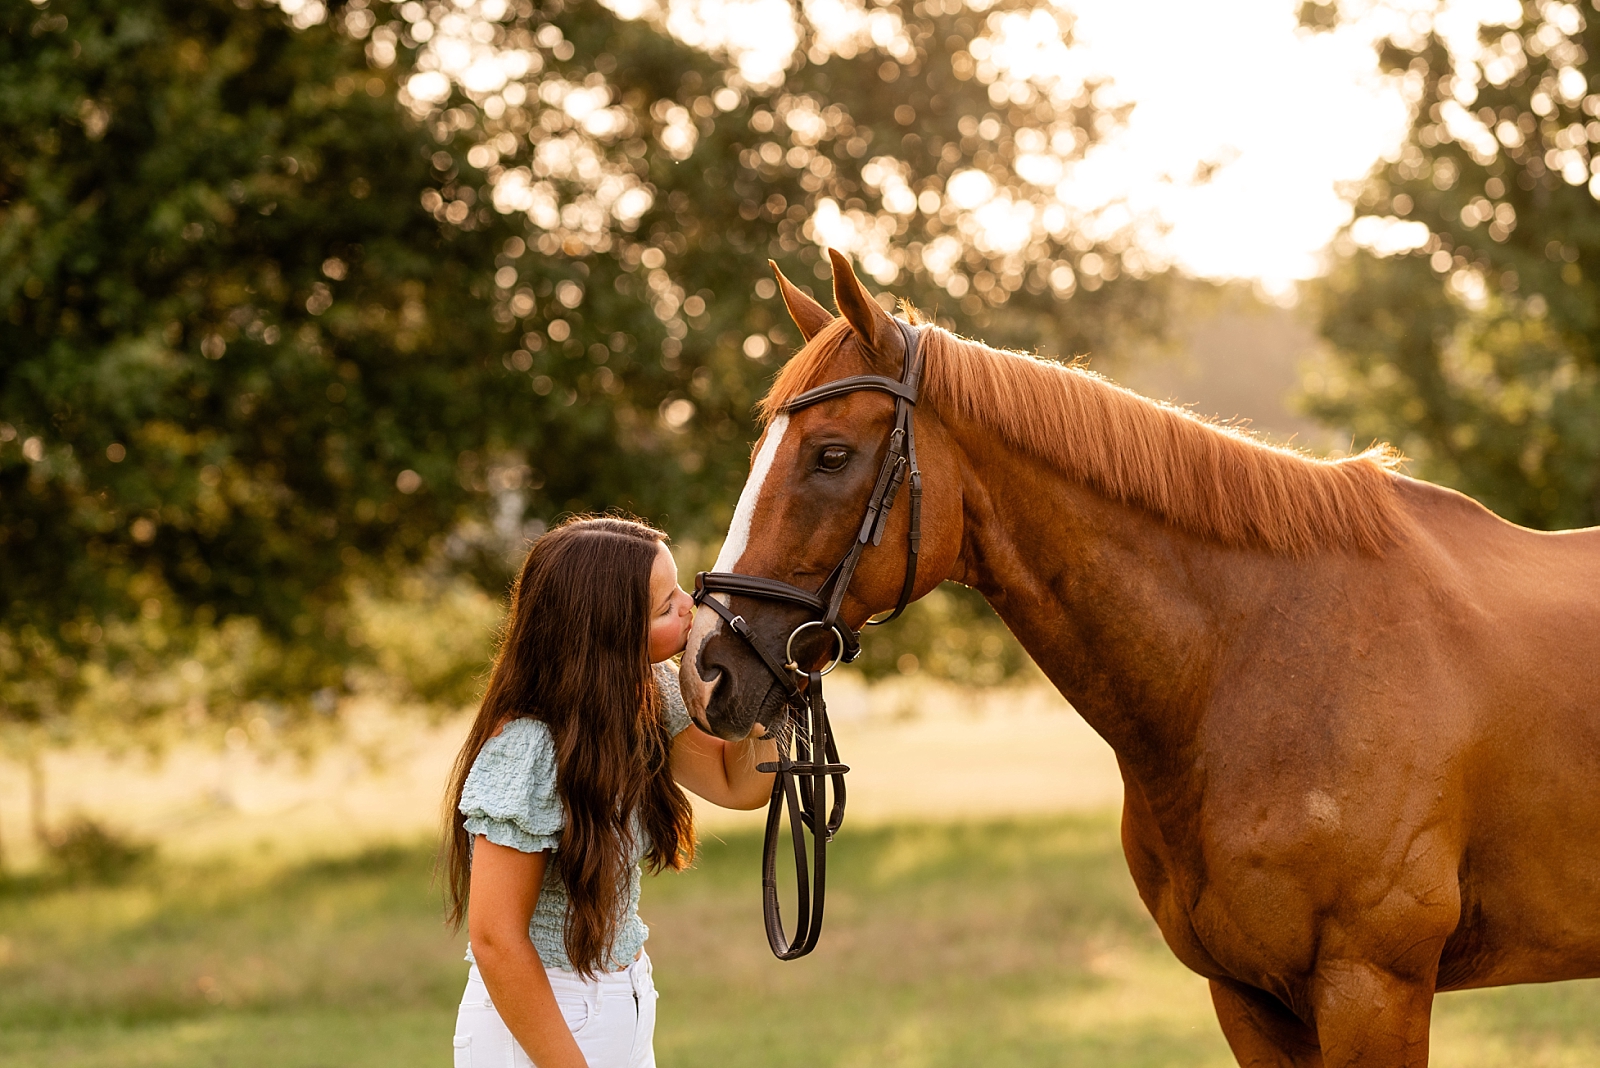 Equine photographer near Tuscaloosa, Alabama takes horse and rider portraits of girl in white dress with her Thoroughbred who compete with the Alabama Eventing Team.